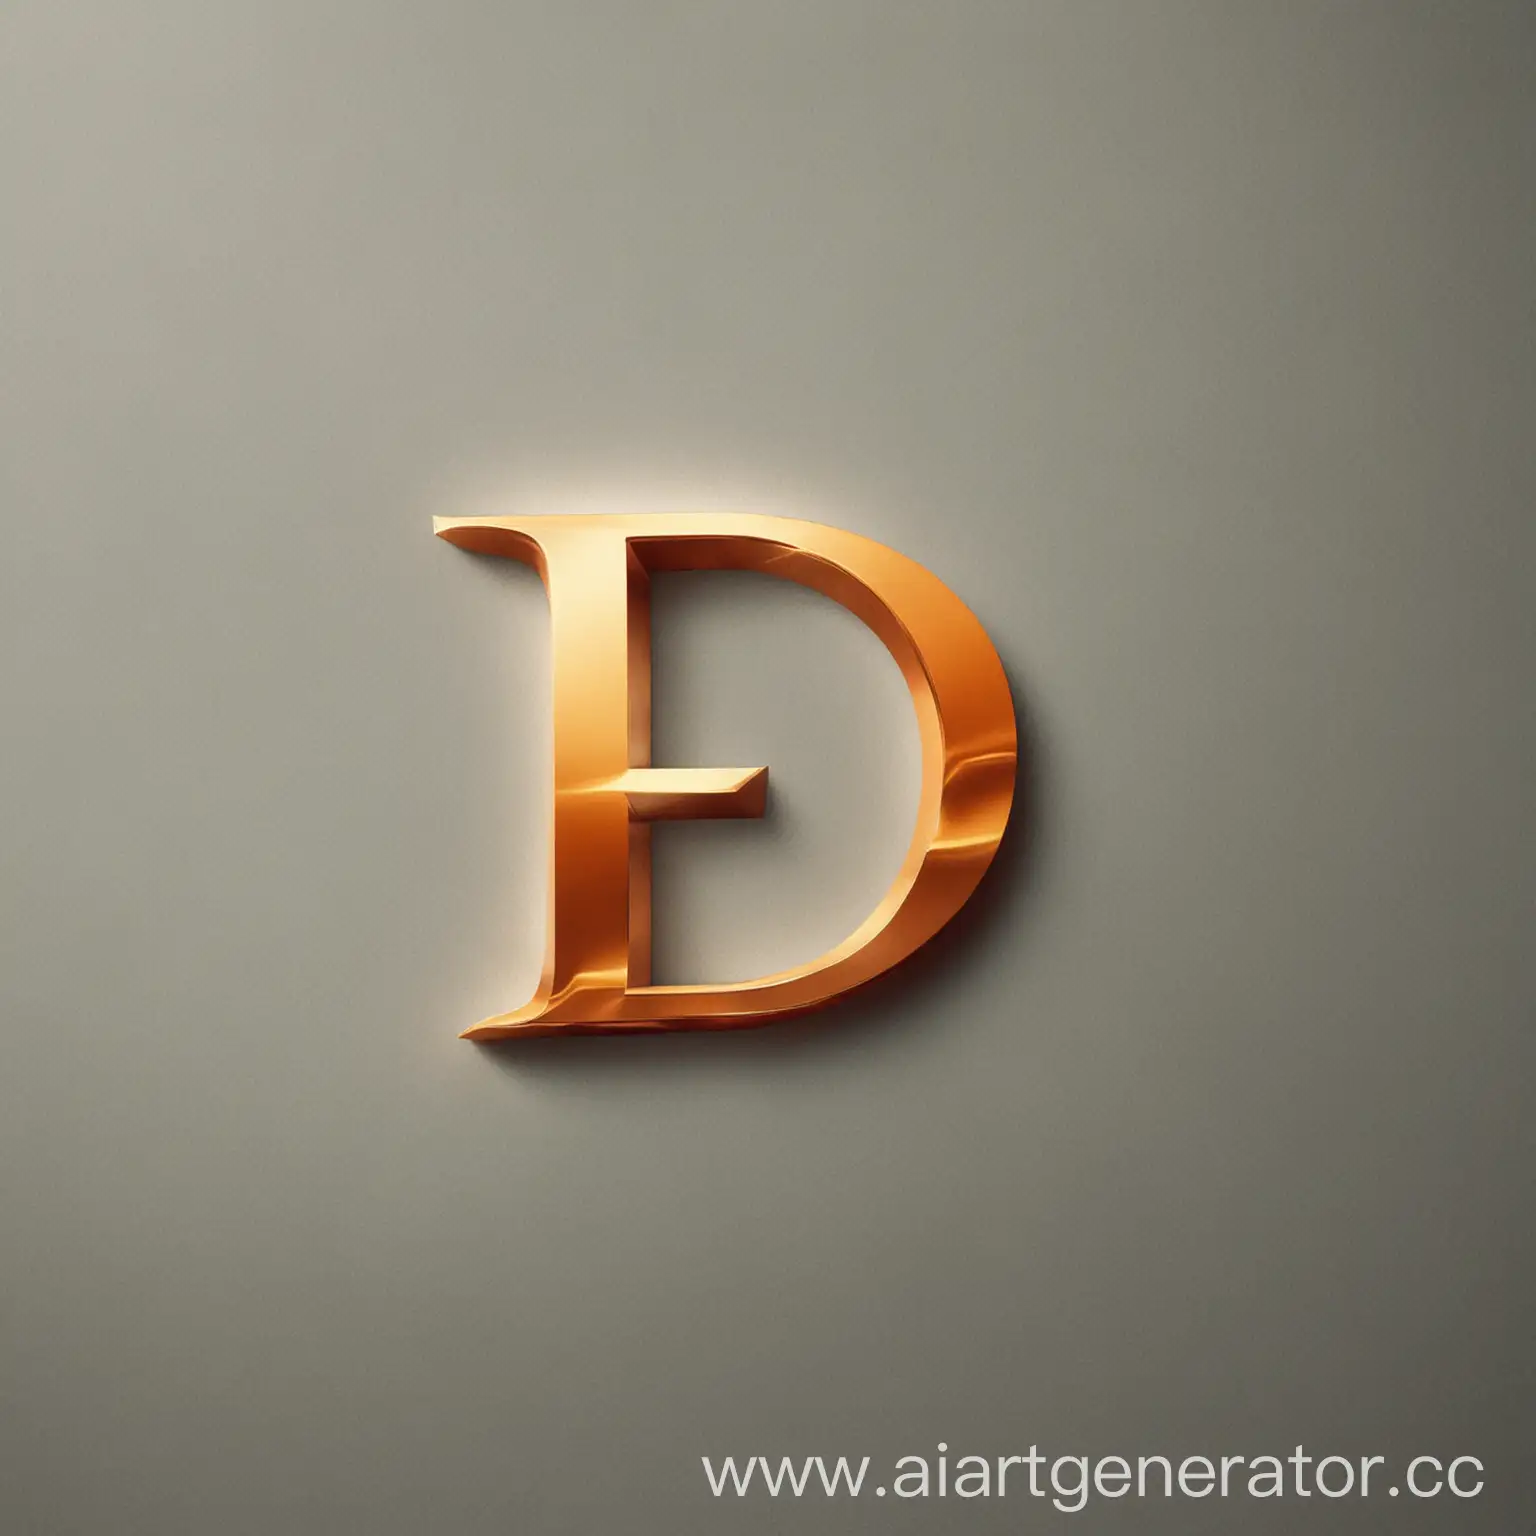 Logo-Design-with-Letters-E-and-D